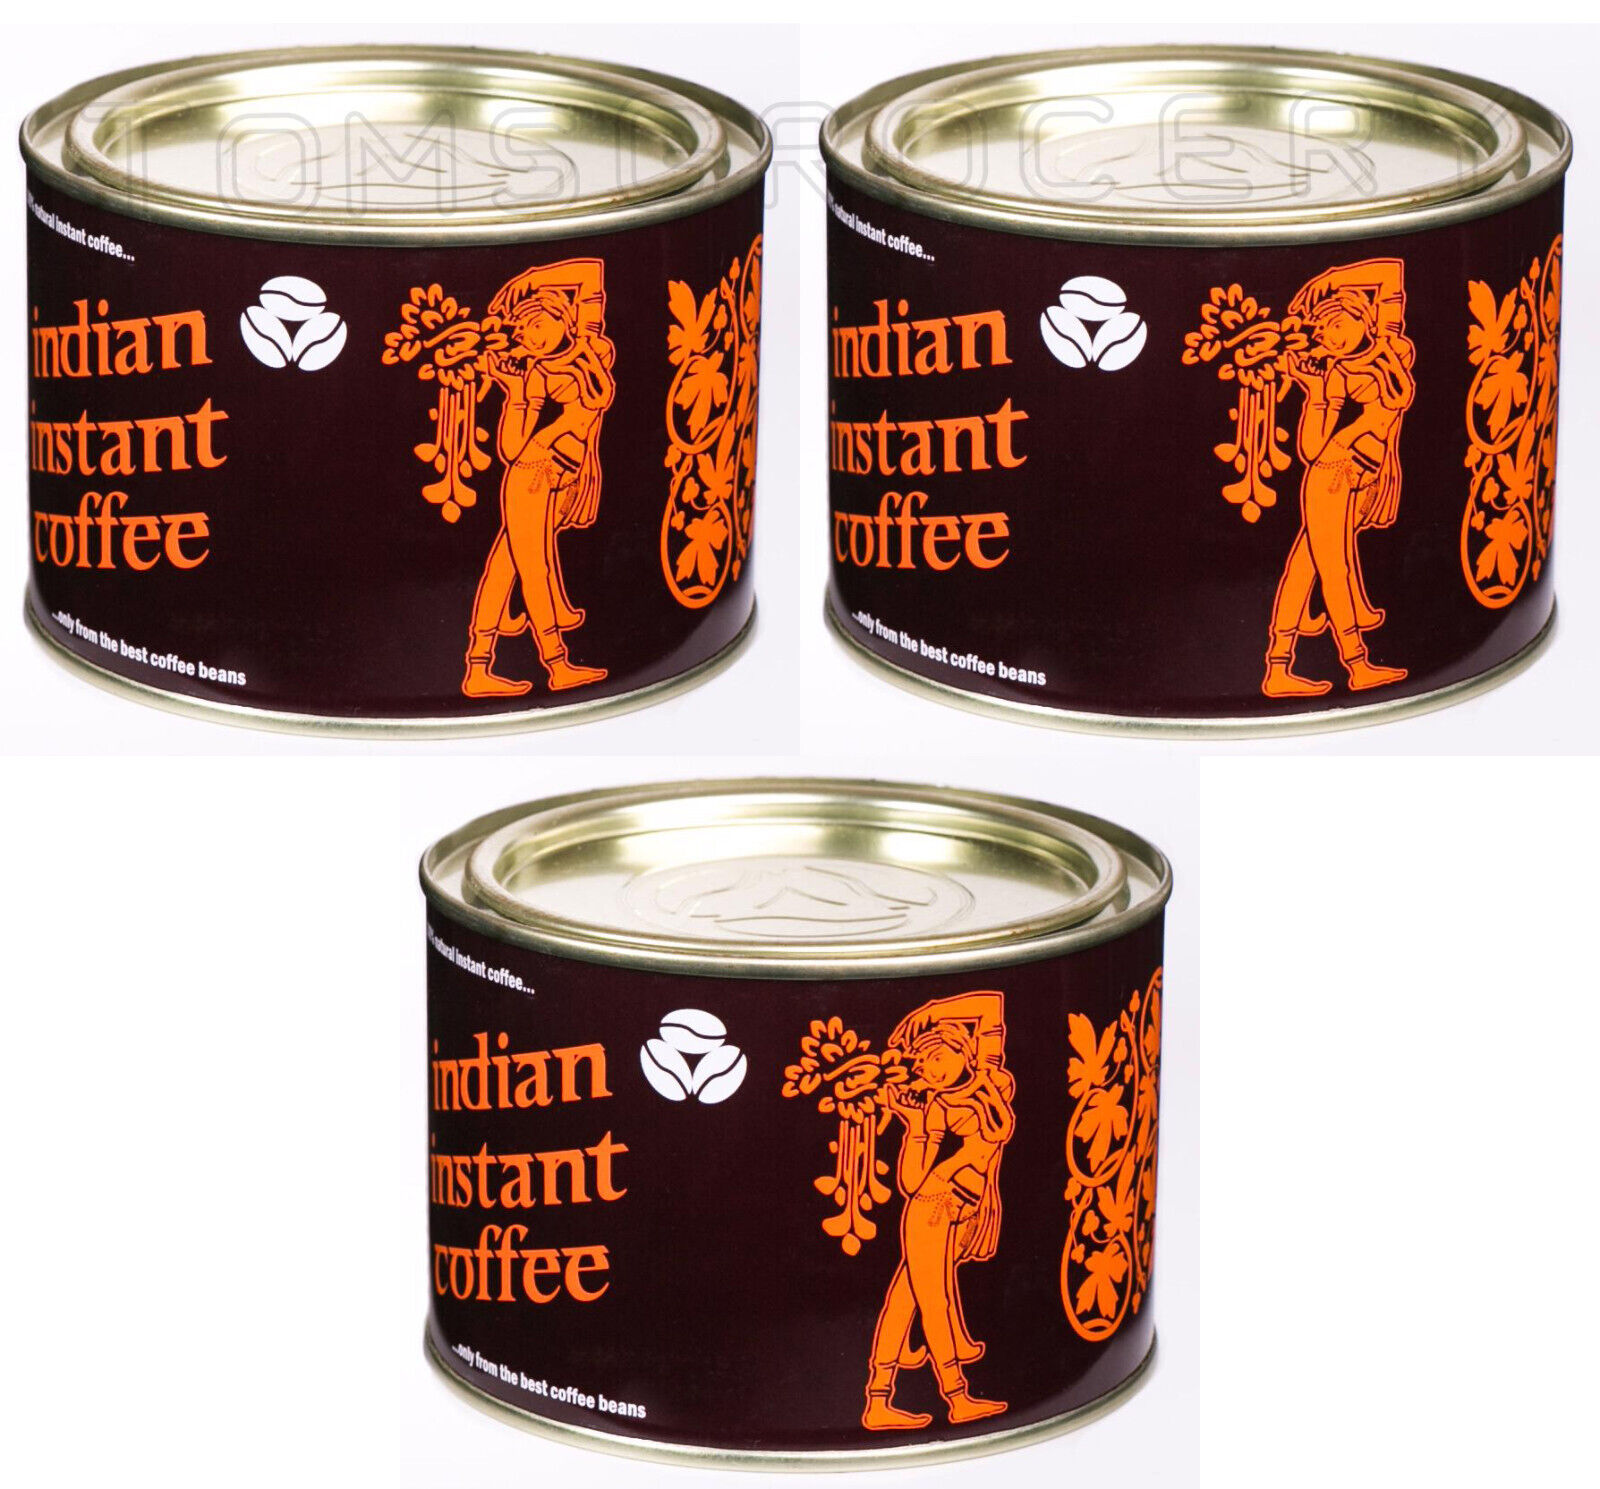 3 INDIAN INSTANT COFFEE 100% Natural Coffee From Best Beans Tins 90g 3.2oz